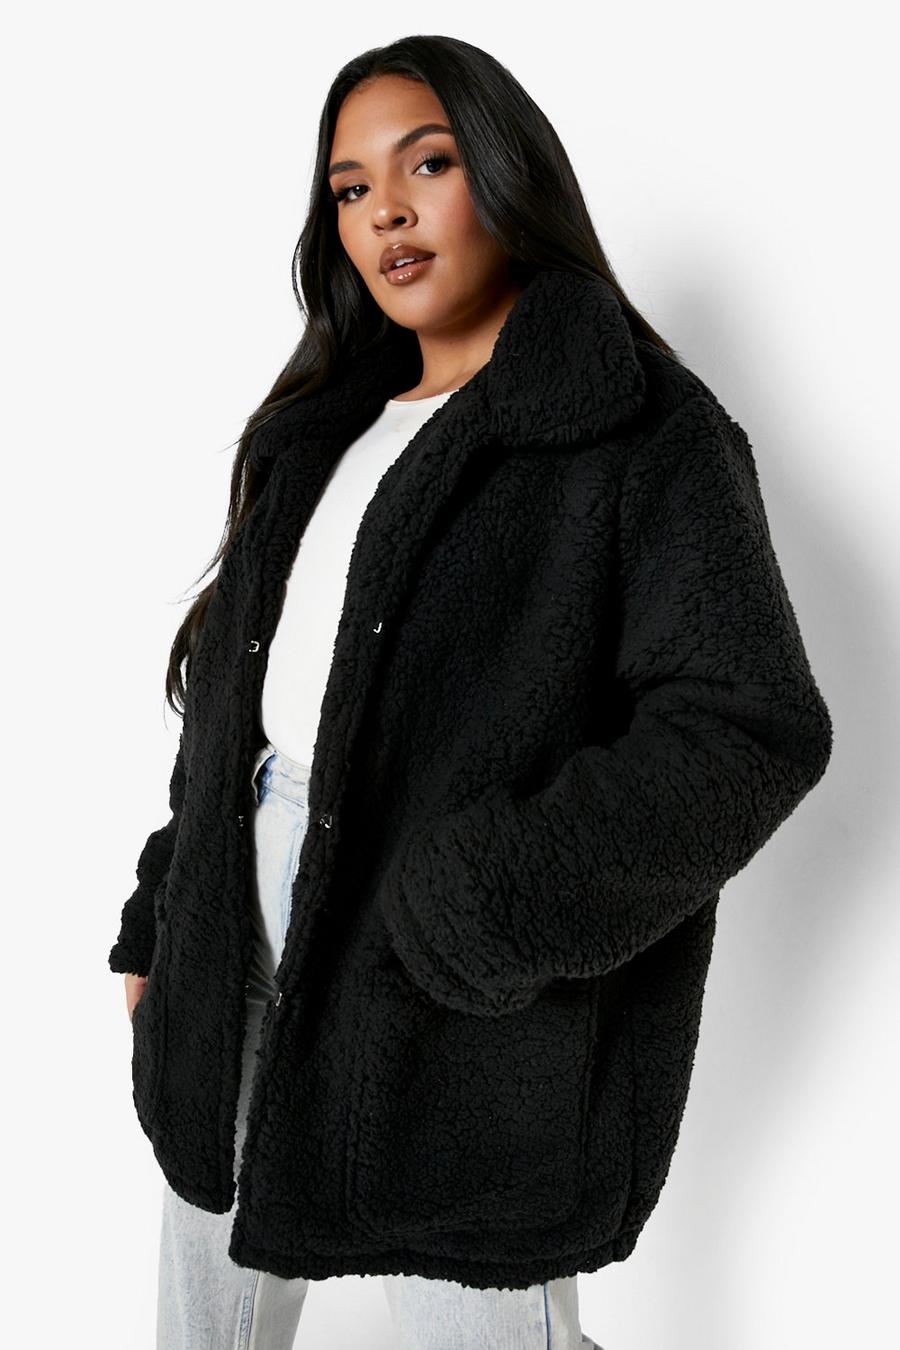 YOURS Plus Size Black Teddy Hooded Jacket